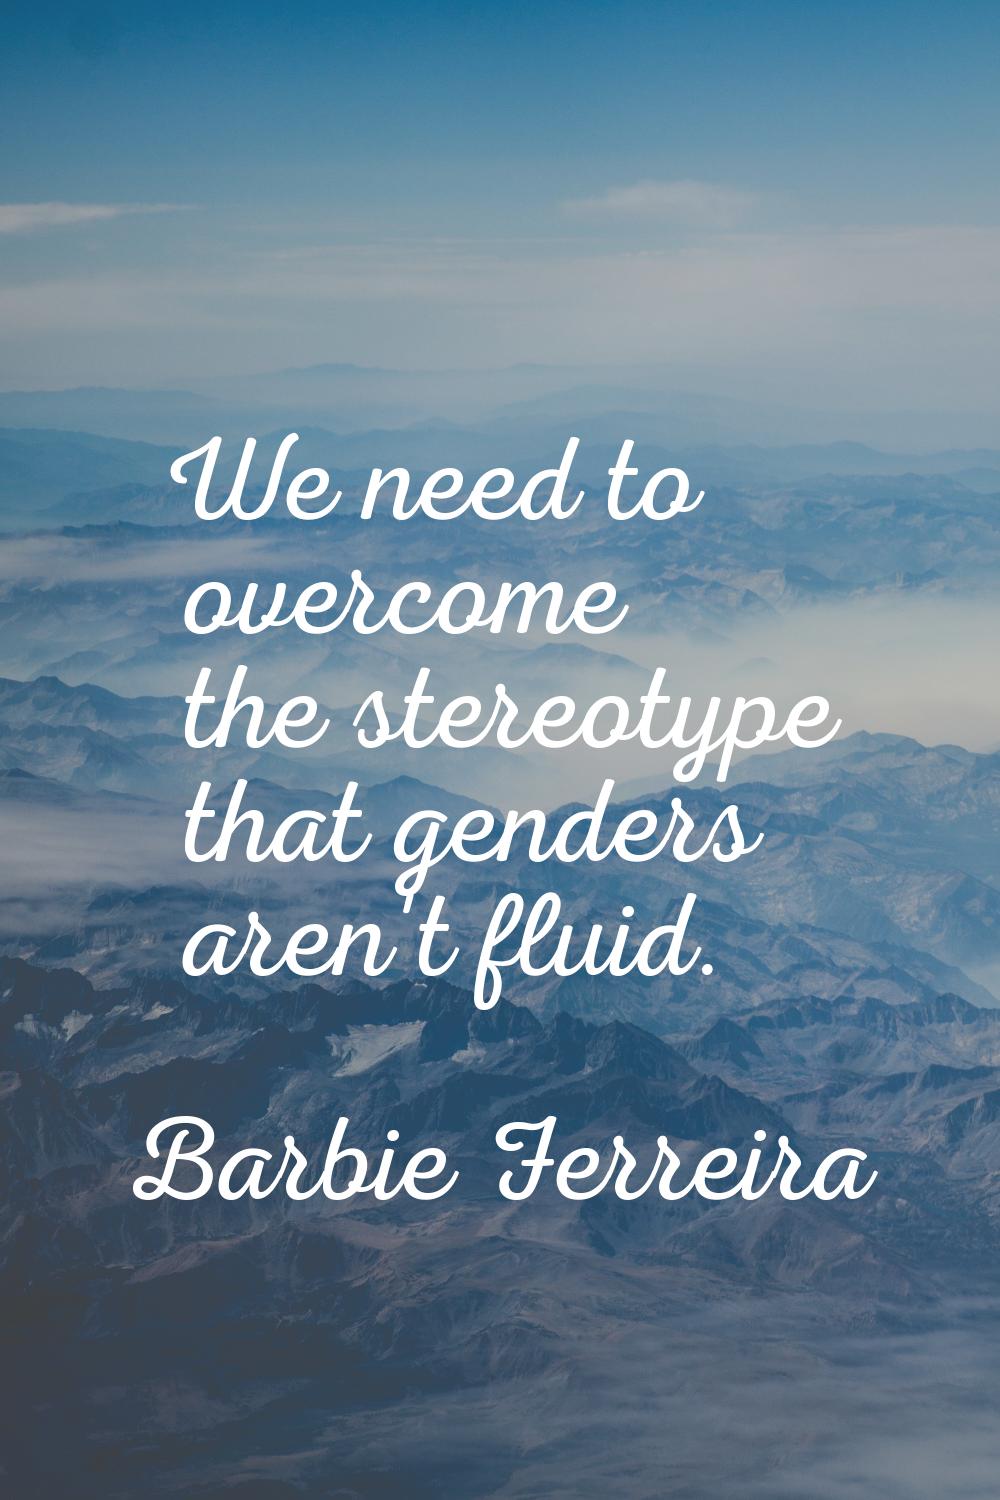 We need to overcome the stereotype that genders aren't fluid.